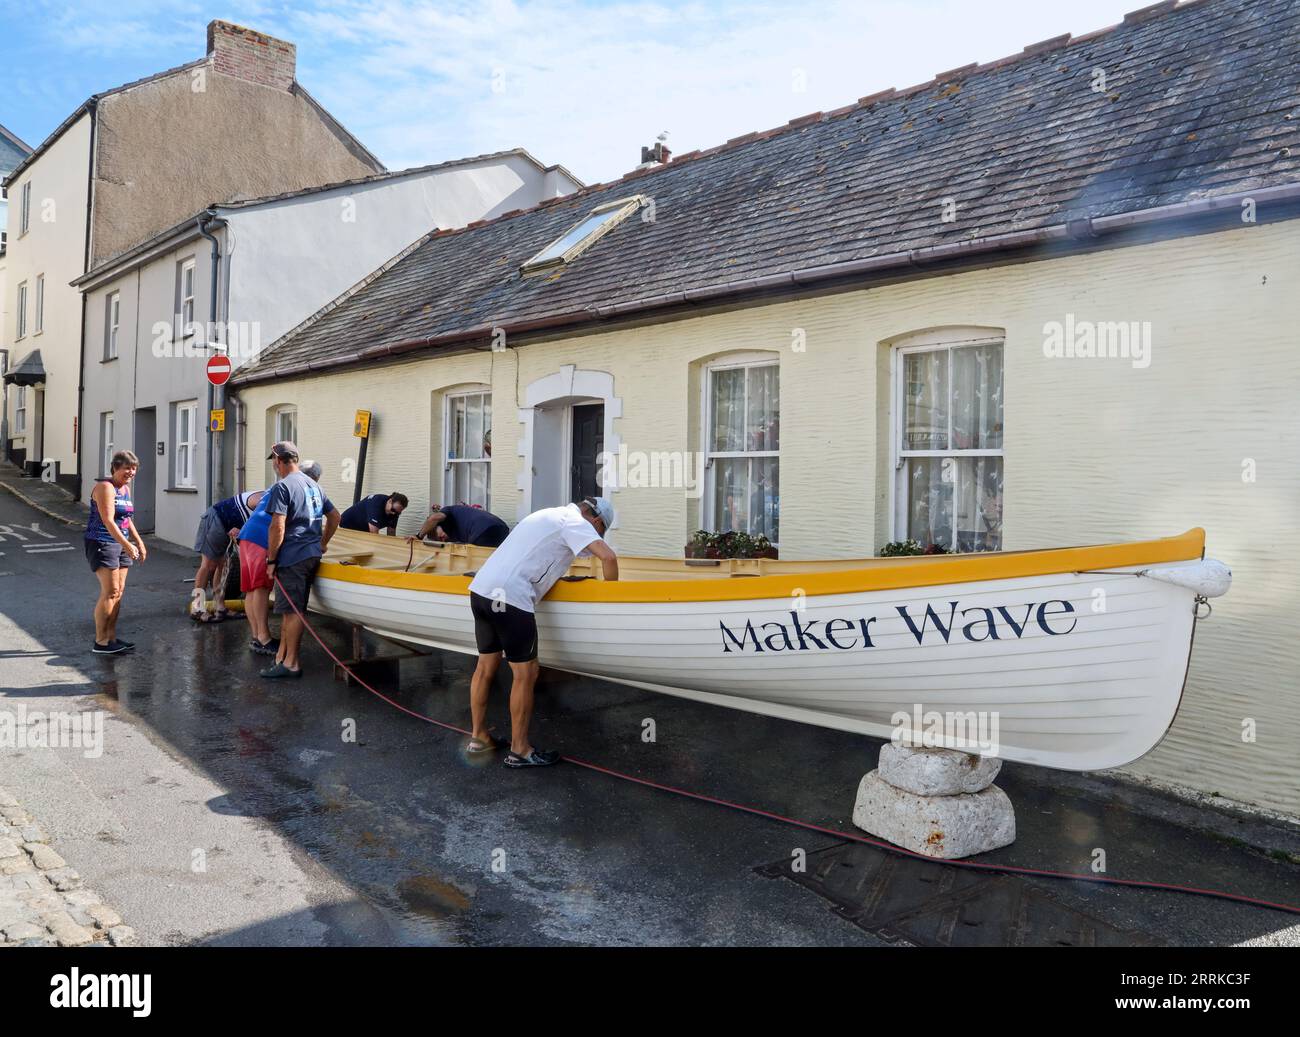 Cawsand Square in south east Cornwall on the often overlooked Rame Peninsula. The Rame Gig Club team givng maintenance to the Maker Wave gig boat on a Stock Photo